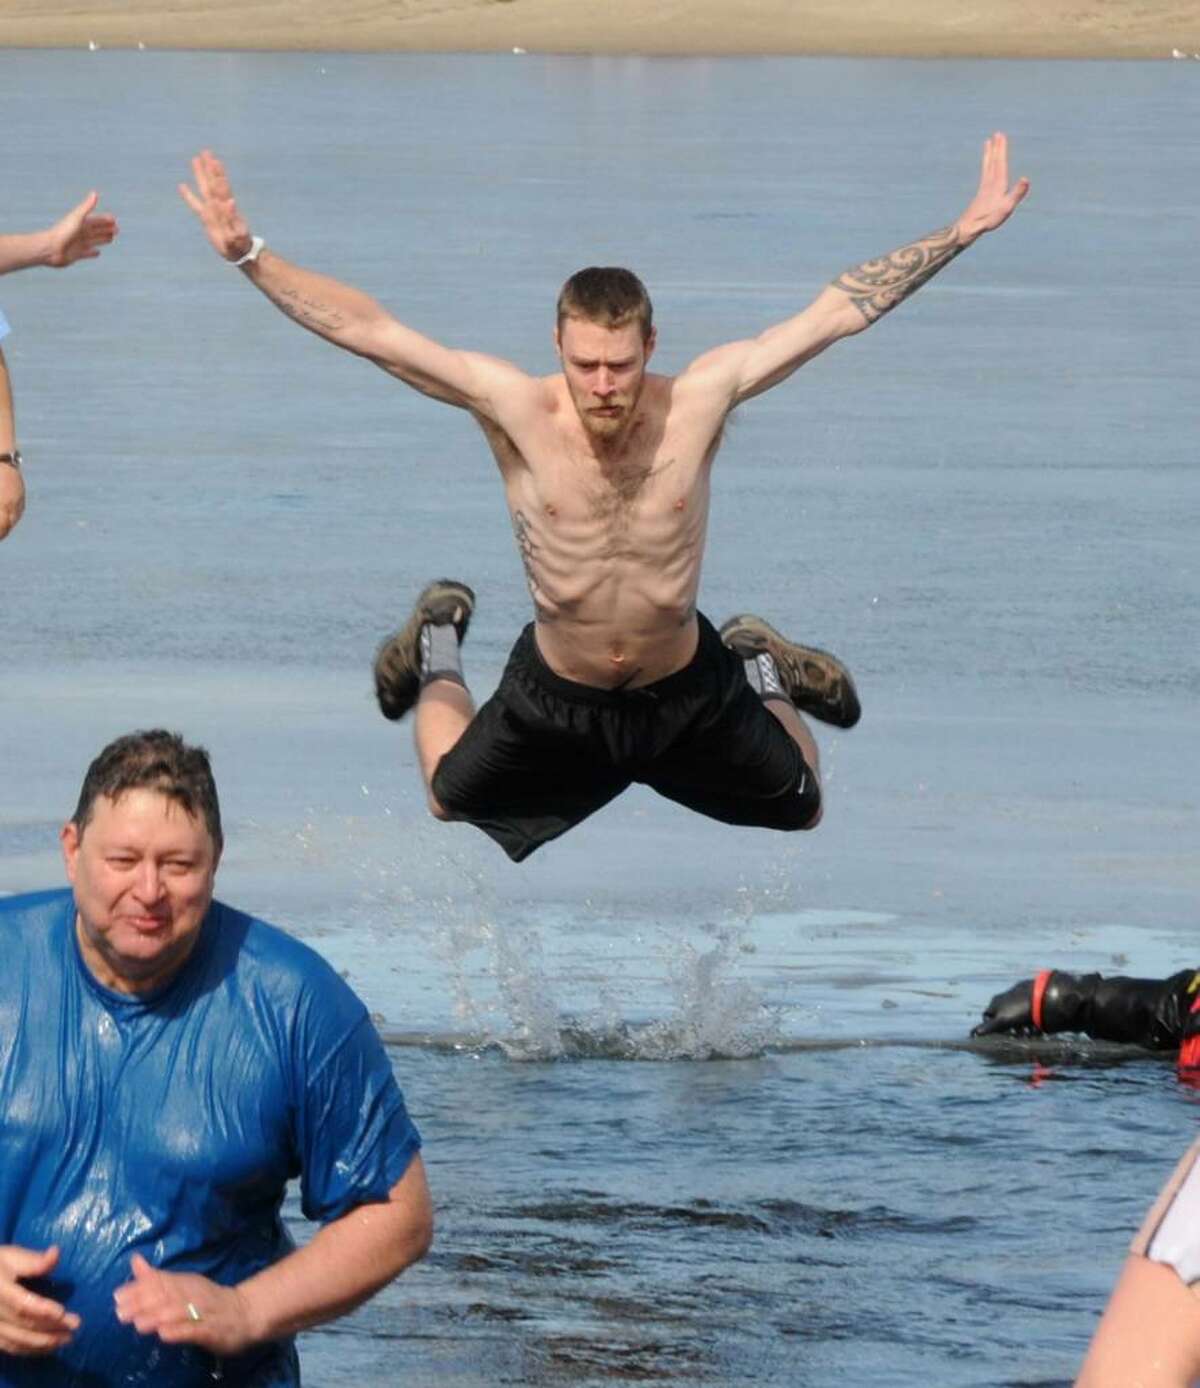 Jack Knapp Sr. Danbury Dip for Charity. Members of the Moose Lodge jump into chilly Lake Kenosia on Saturday to raise money for charity. L, Jack Knapp Jr. (the founders son) wades out of the water and R, John Webber III takes the dive. February 2009